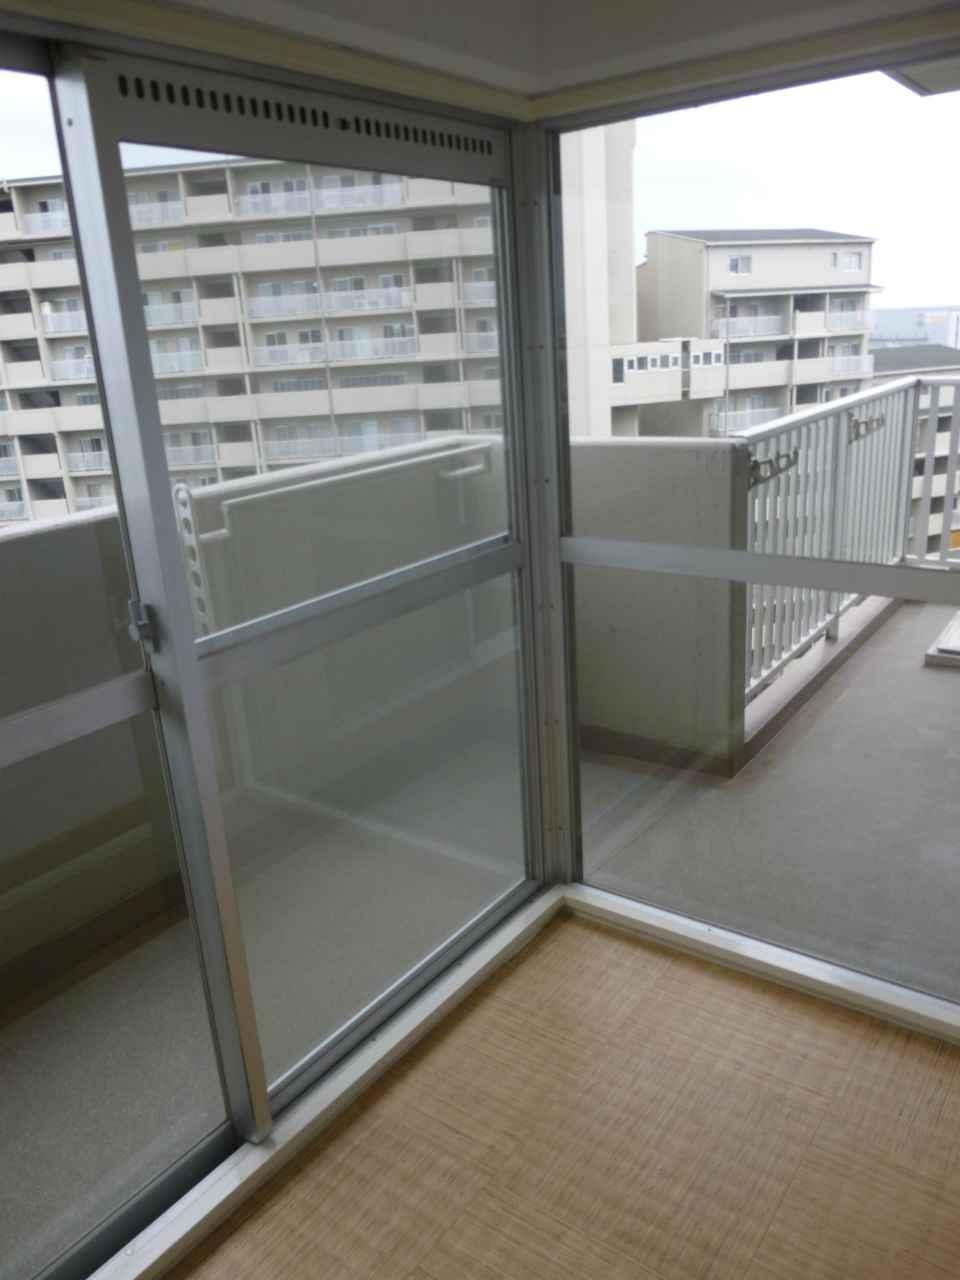 Balcony. Yang per is good because the spacious high no building before the balcony th.